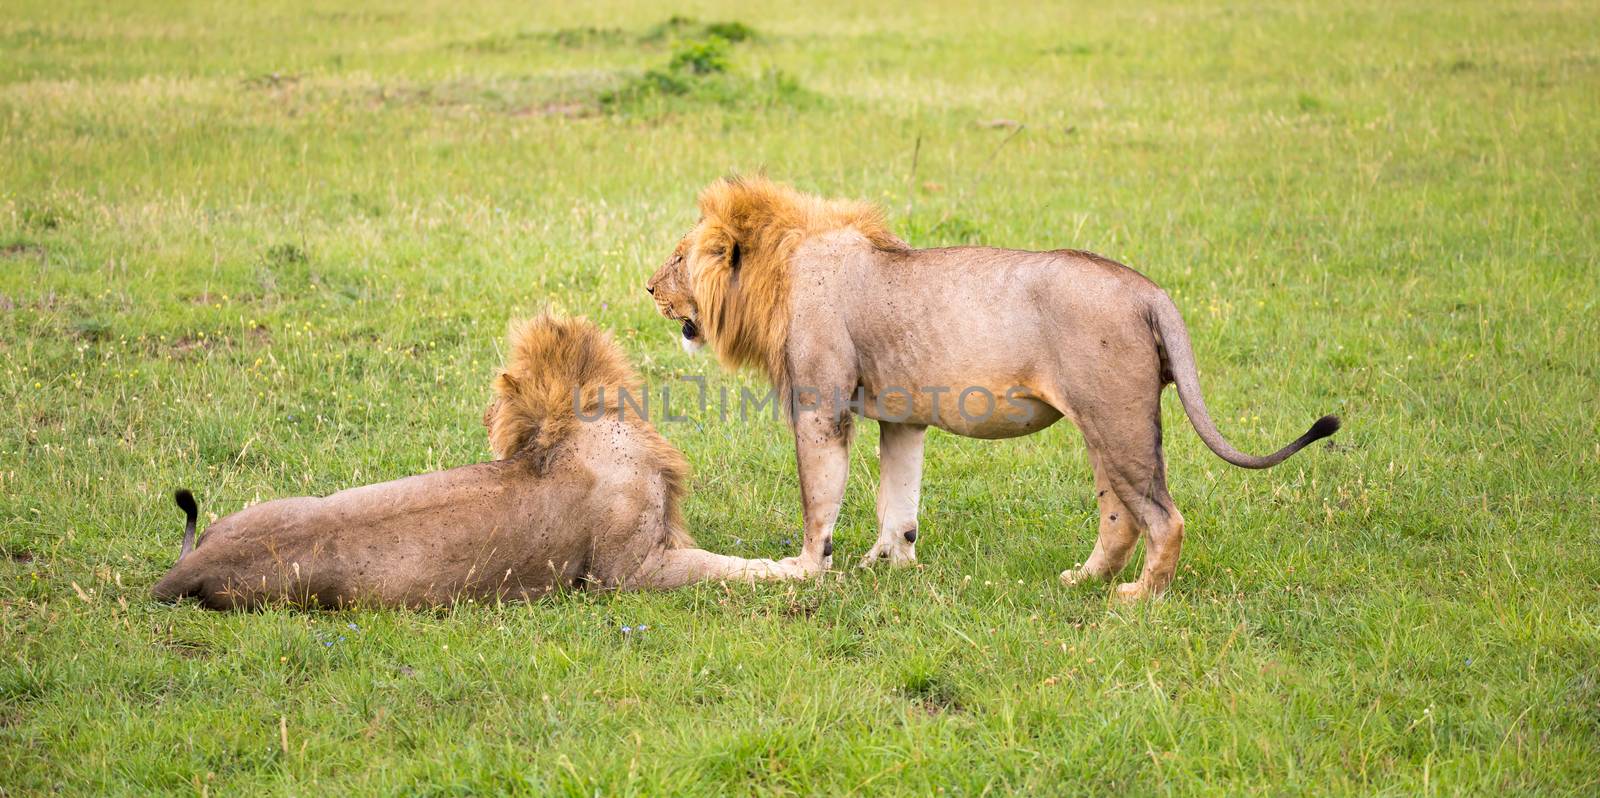 Two big lions show their emotions to each other in the savanna o by 25ehaag6